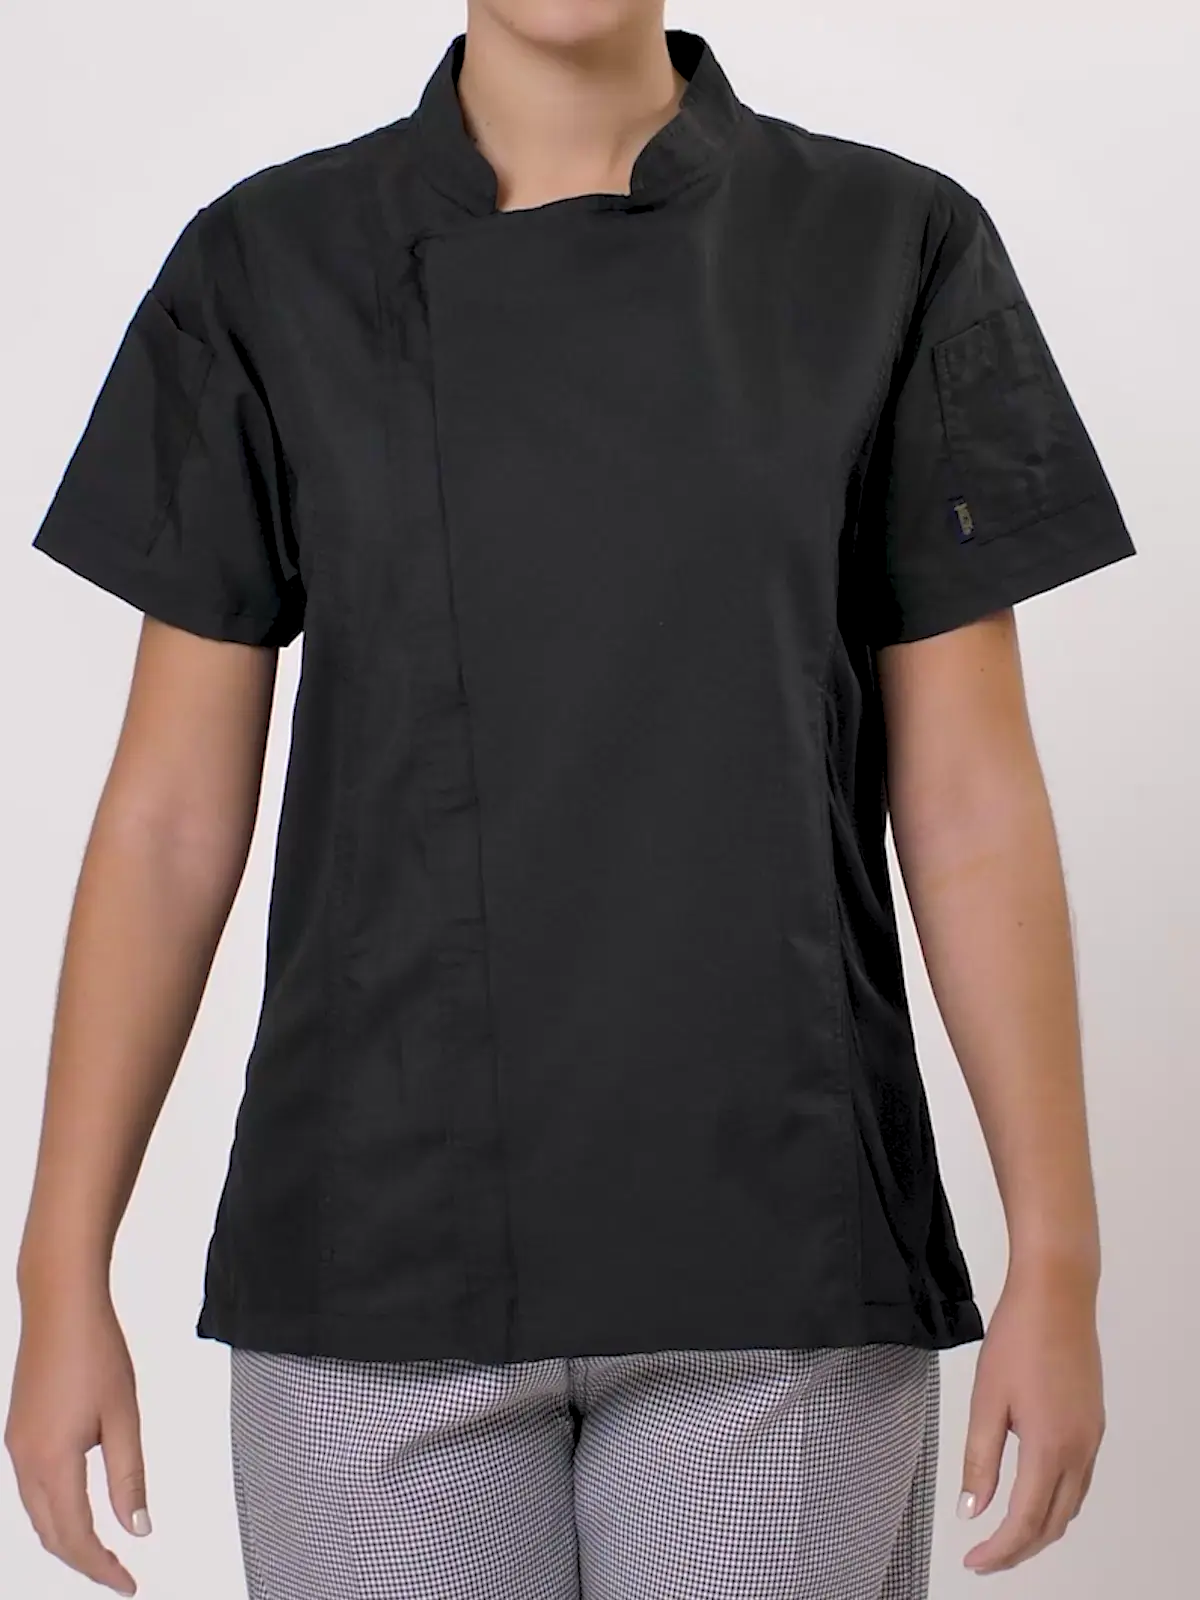 Ventilated Chef Jackets for Women in Texas